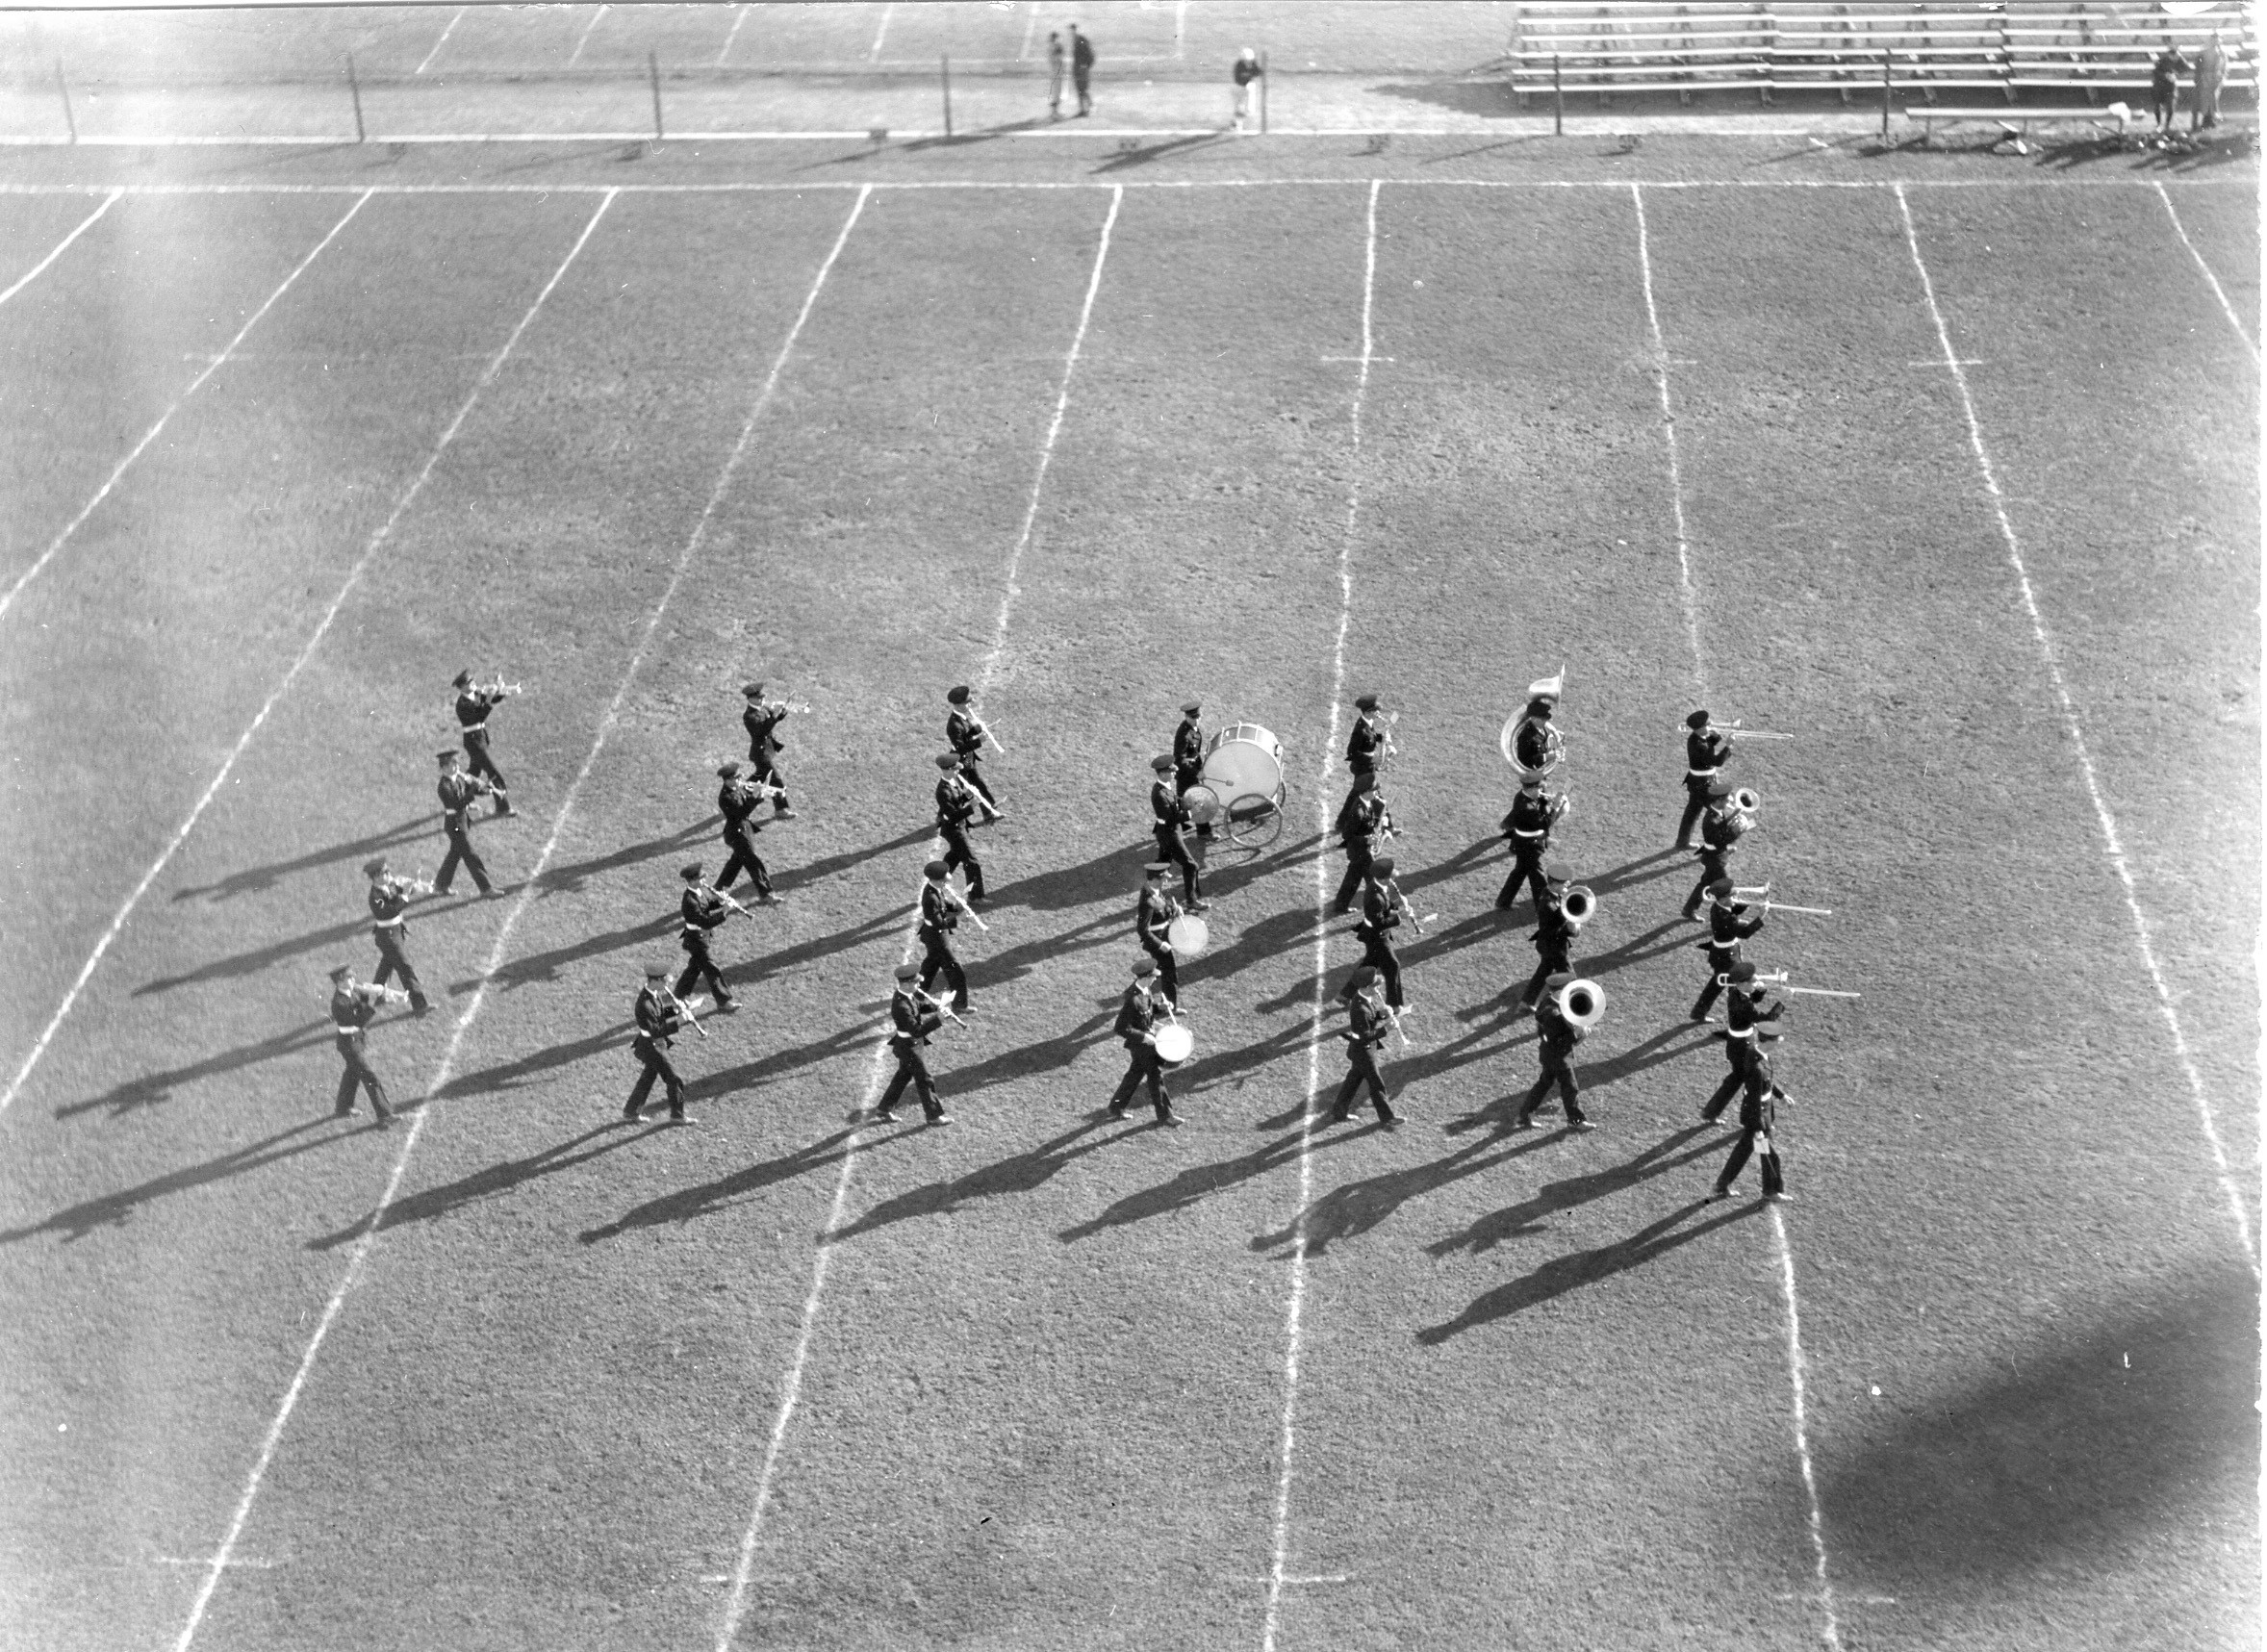 Historic photo shows 29 musicians of the BGSU marching band on the field in 1934